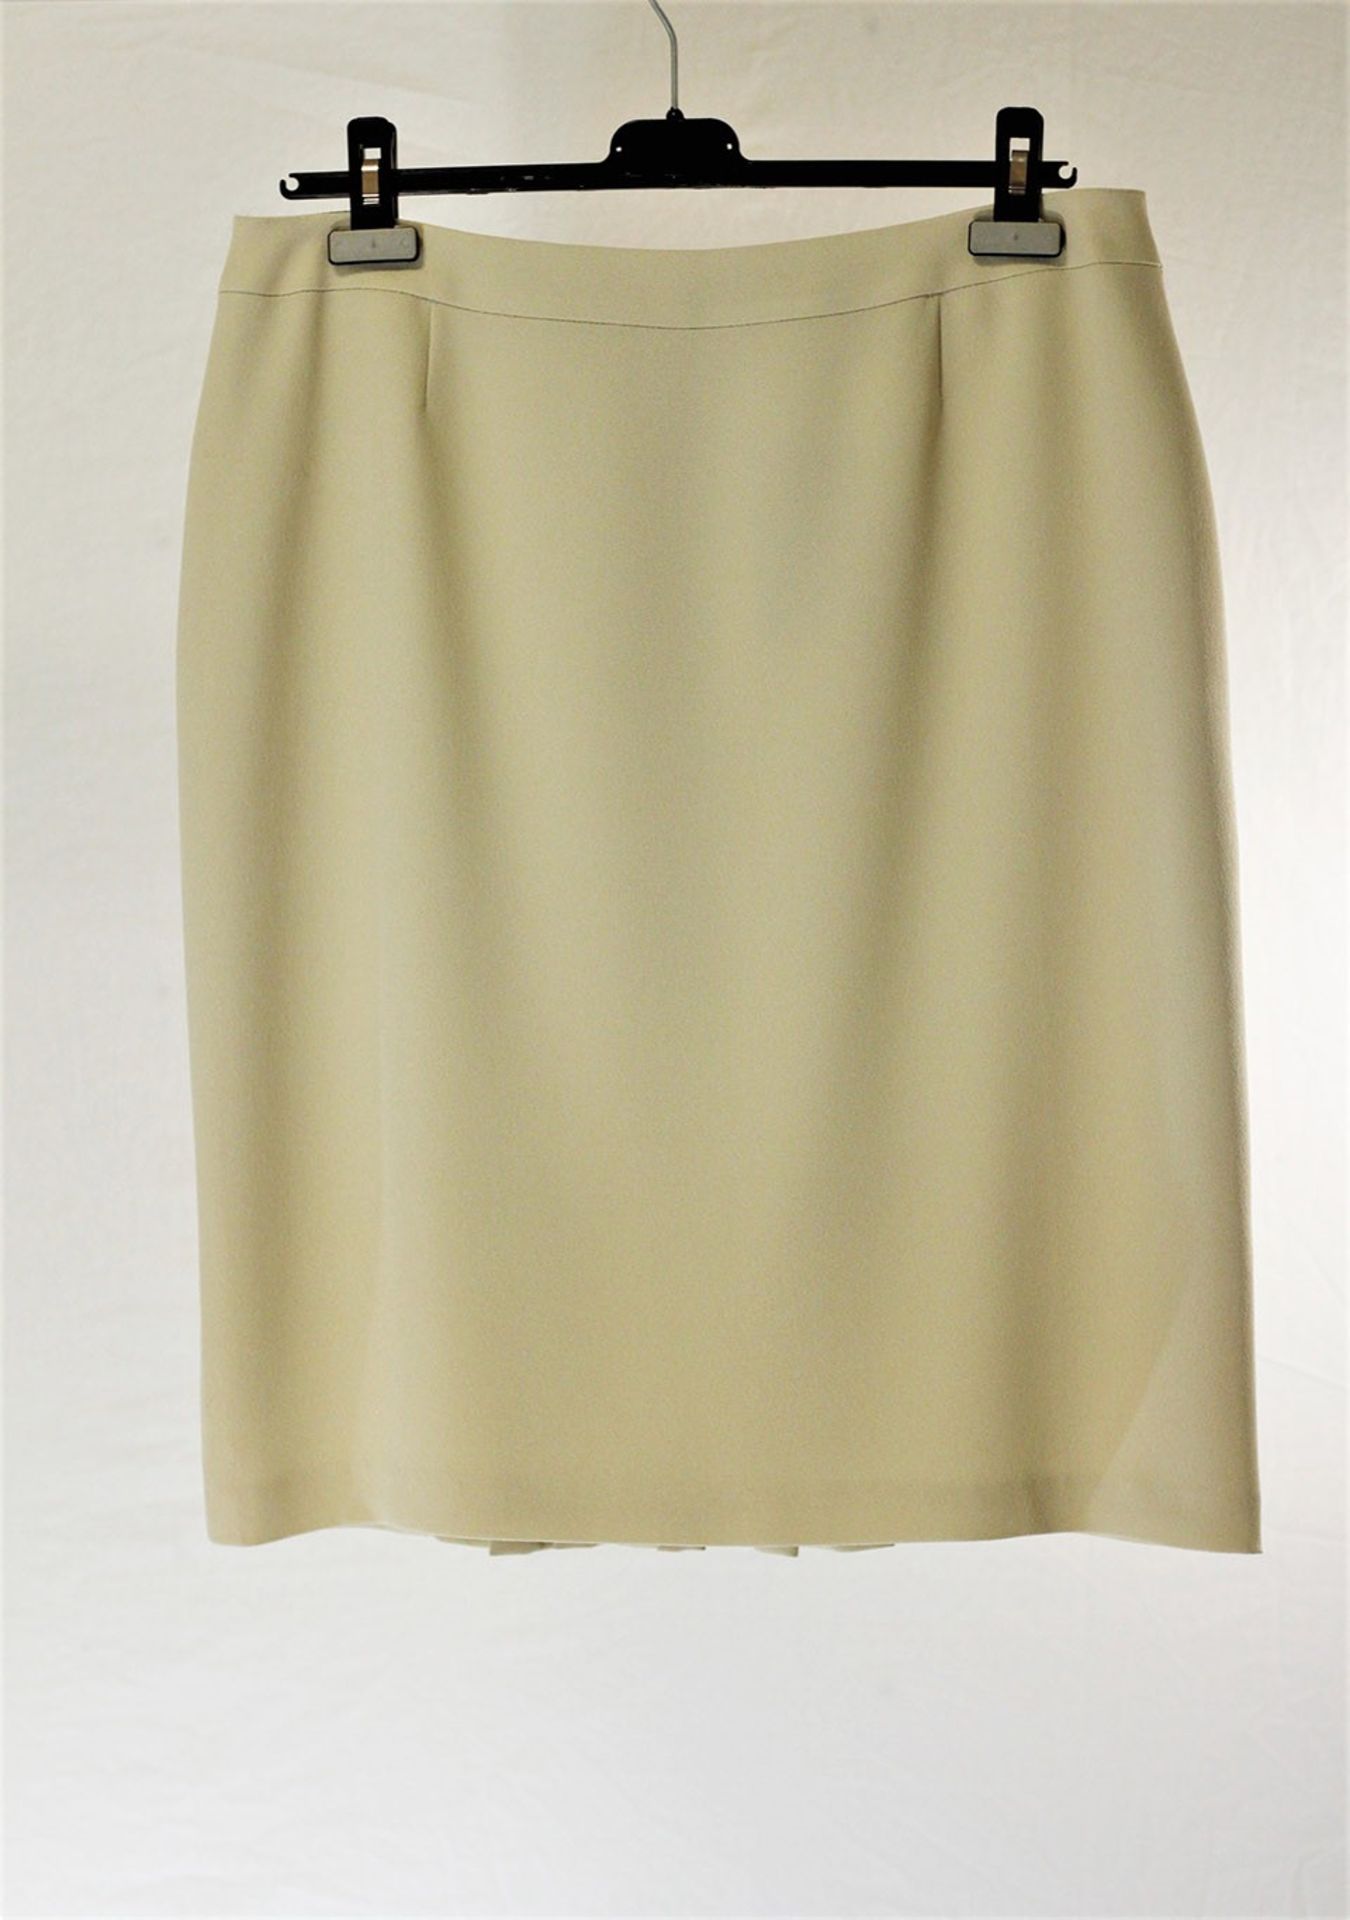 1 x Anne Belin Pistachio Skirt - Size: 20 - Material: 100% Polyester - From a High End Clothing